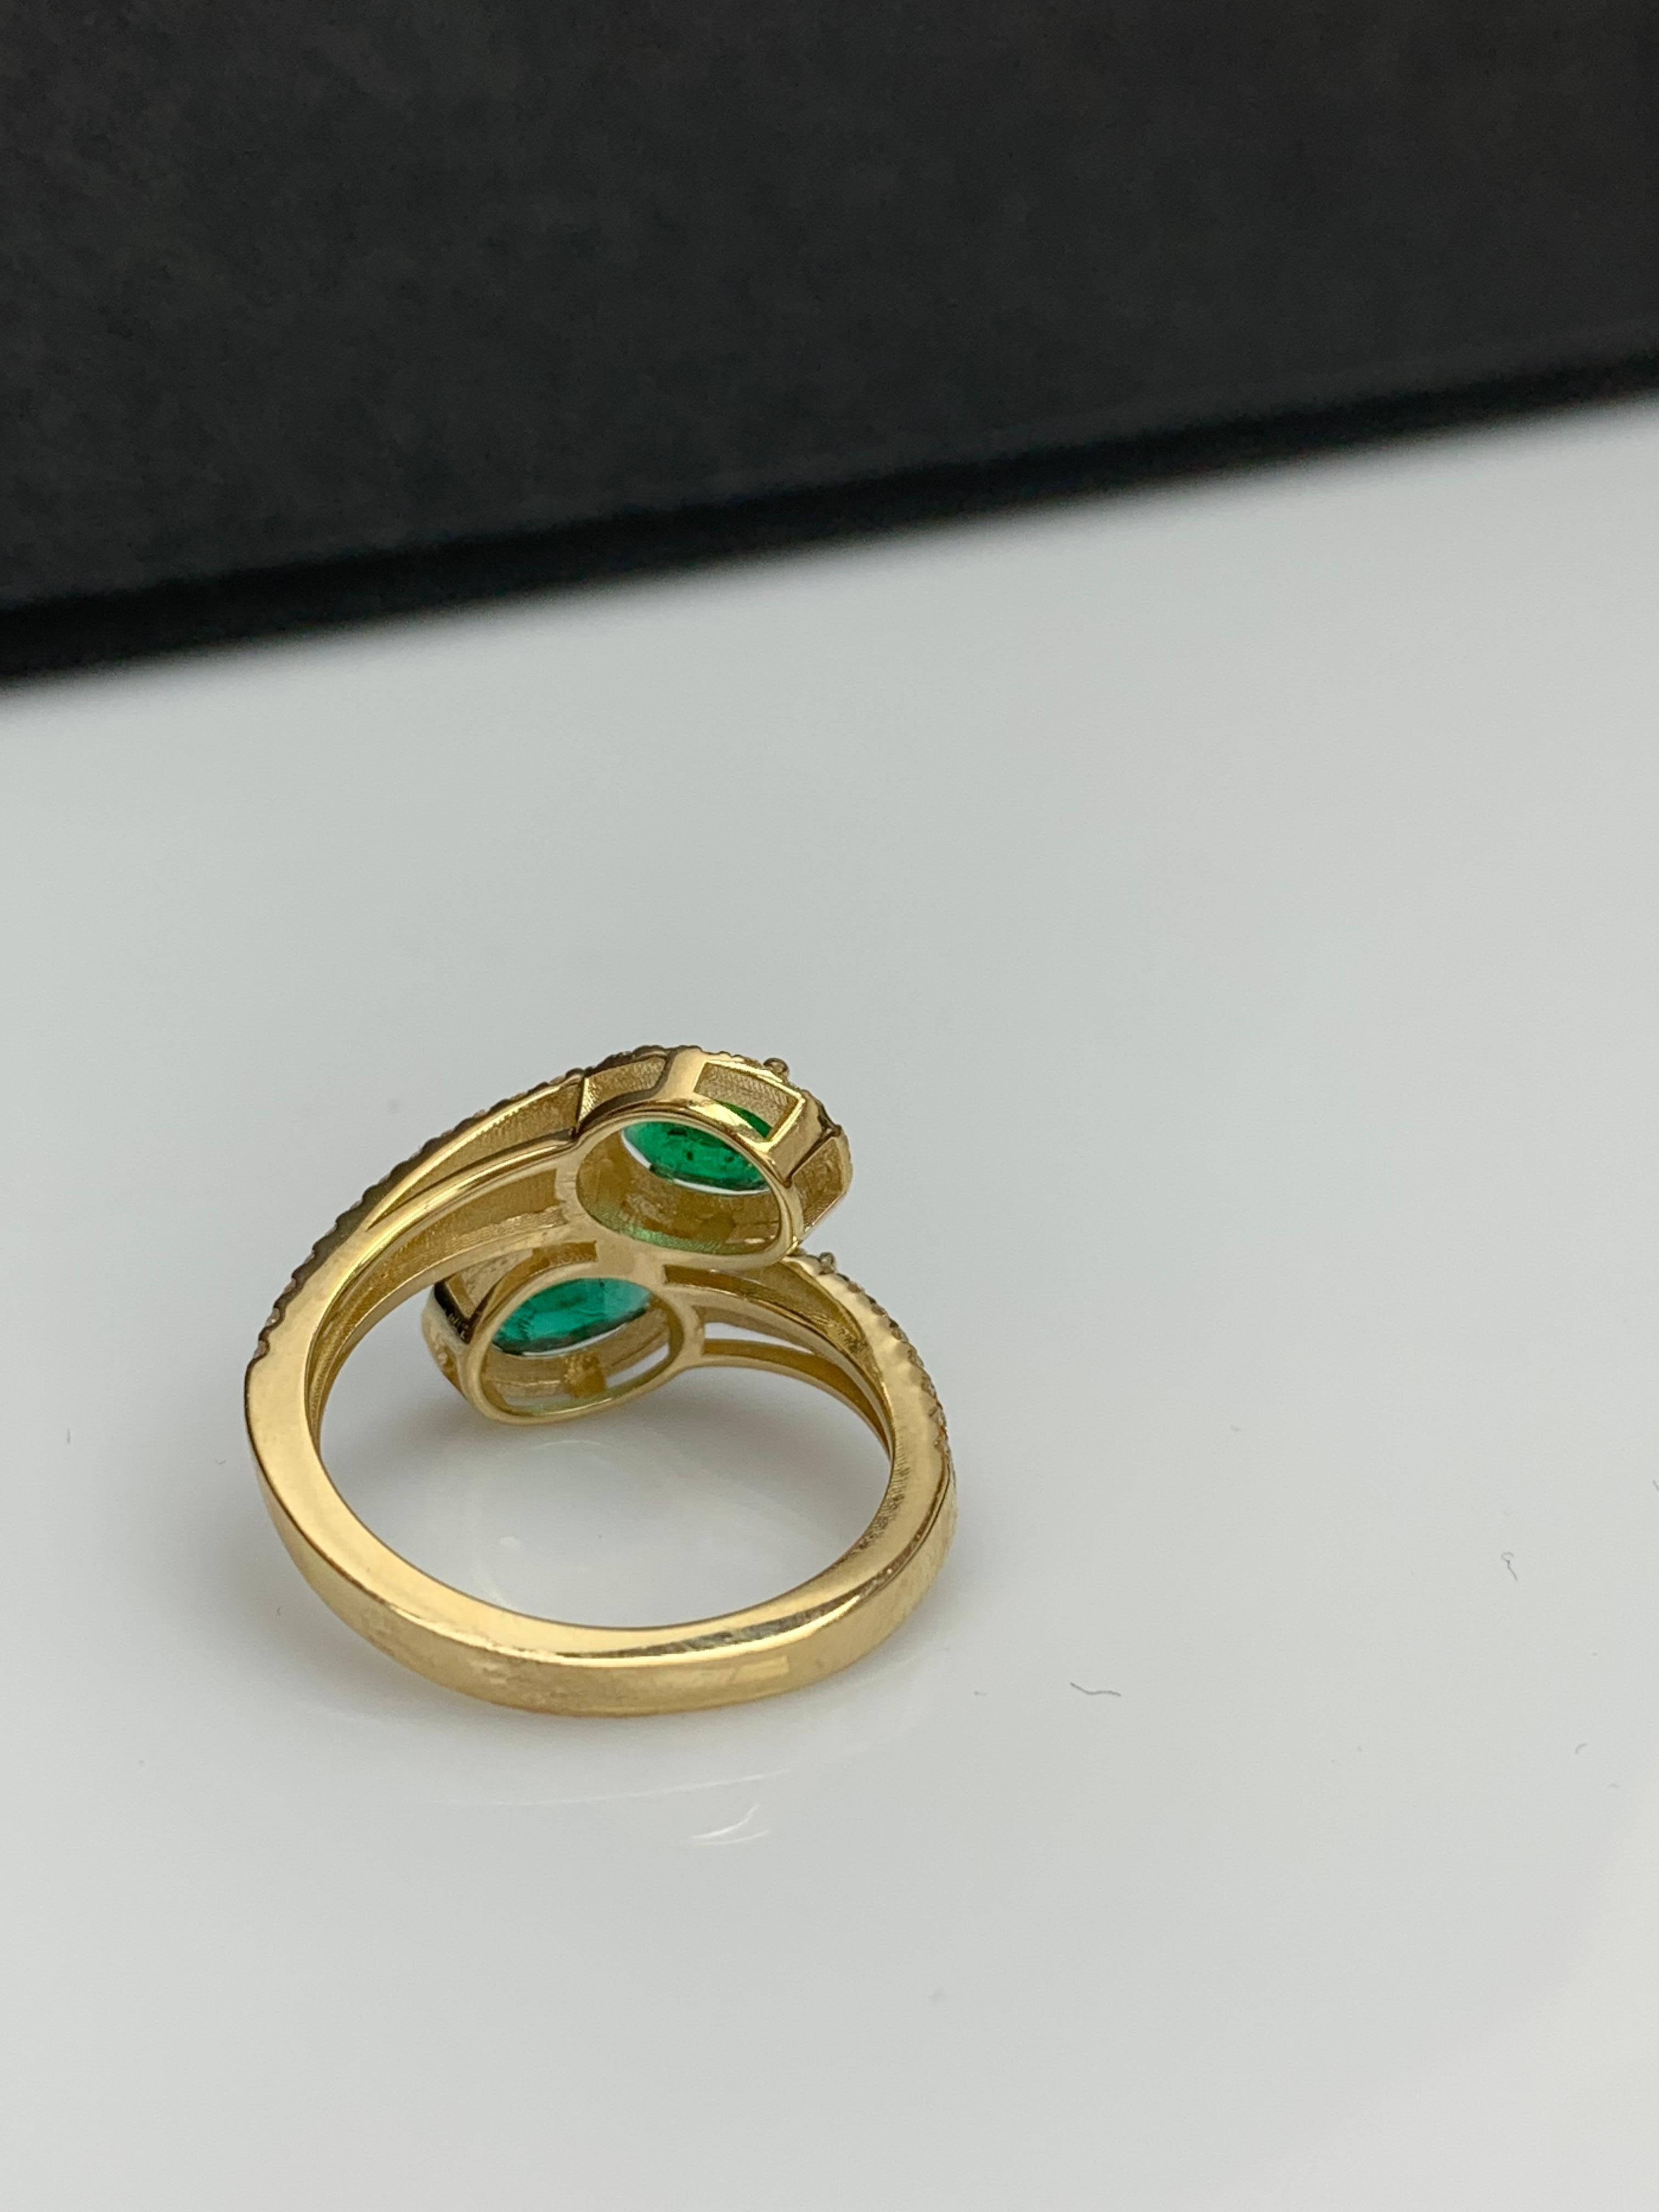 Modern 1.52 Carat Oval Cut Emerald Diamond Toi Et Moi Engagement Ring 14K Yellow Gold For Sale